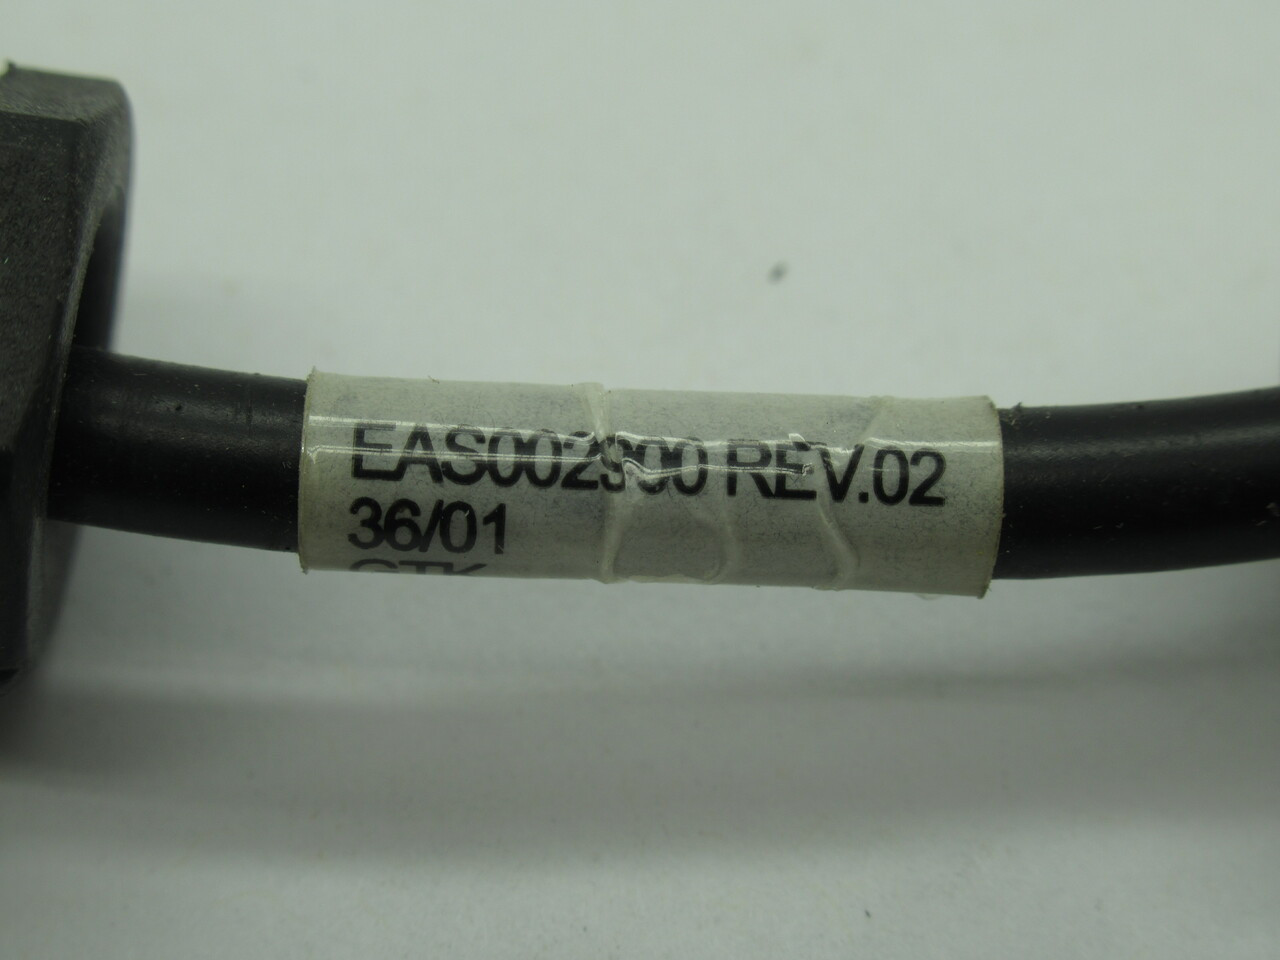 Domino EAS002900 Encoder Connector Cable USED